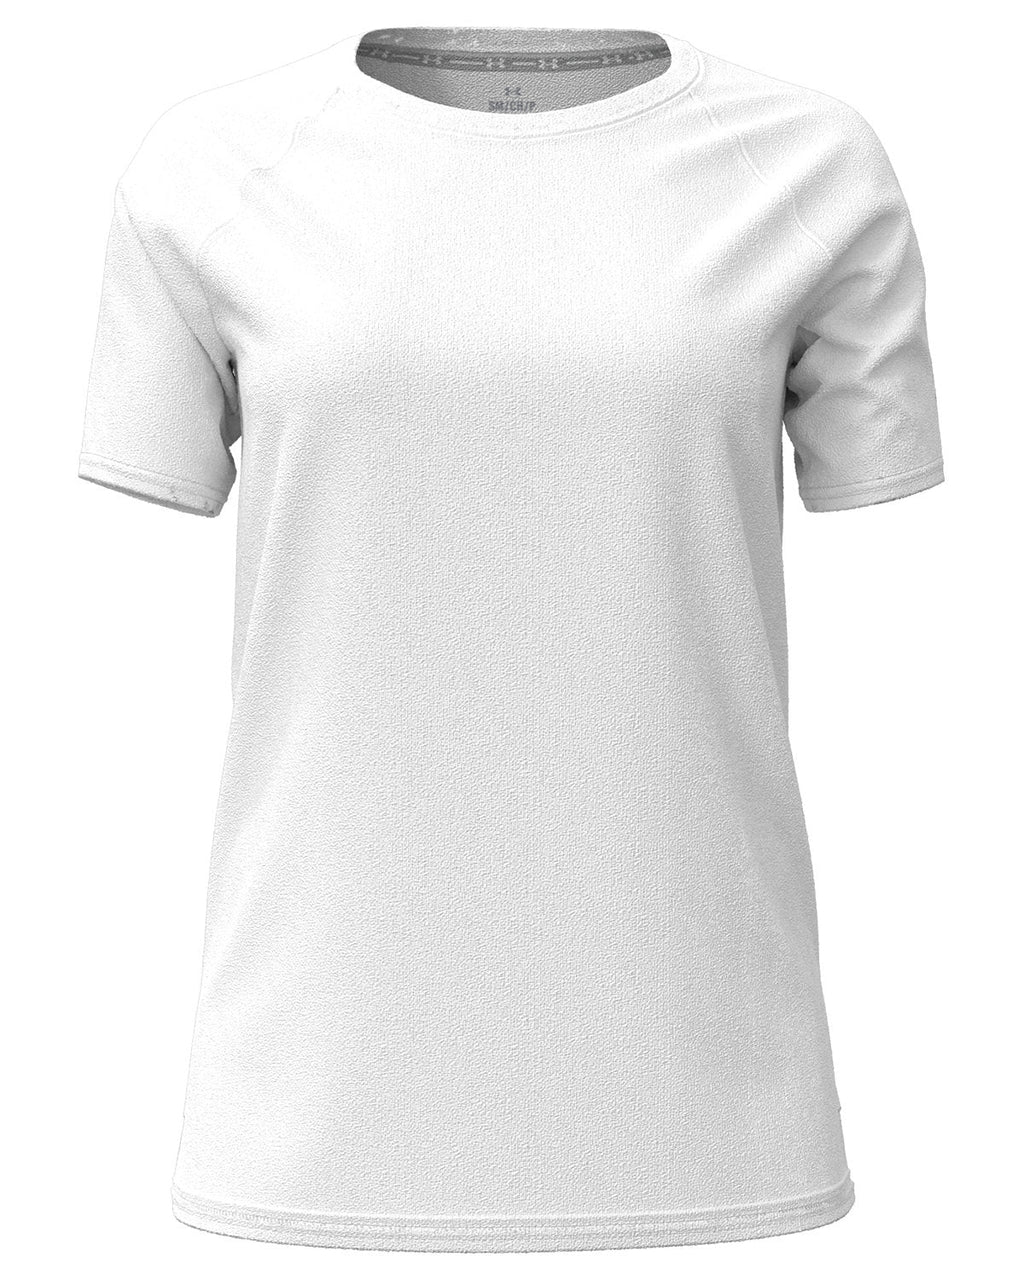 Under Armour Ladies Athletics T-Shirt with Custom Embroidery